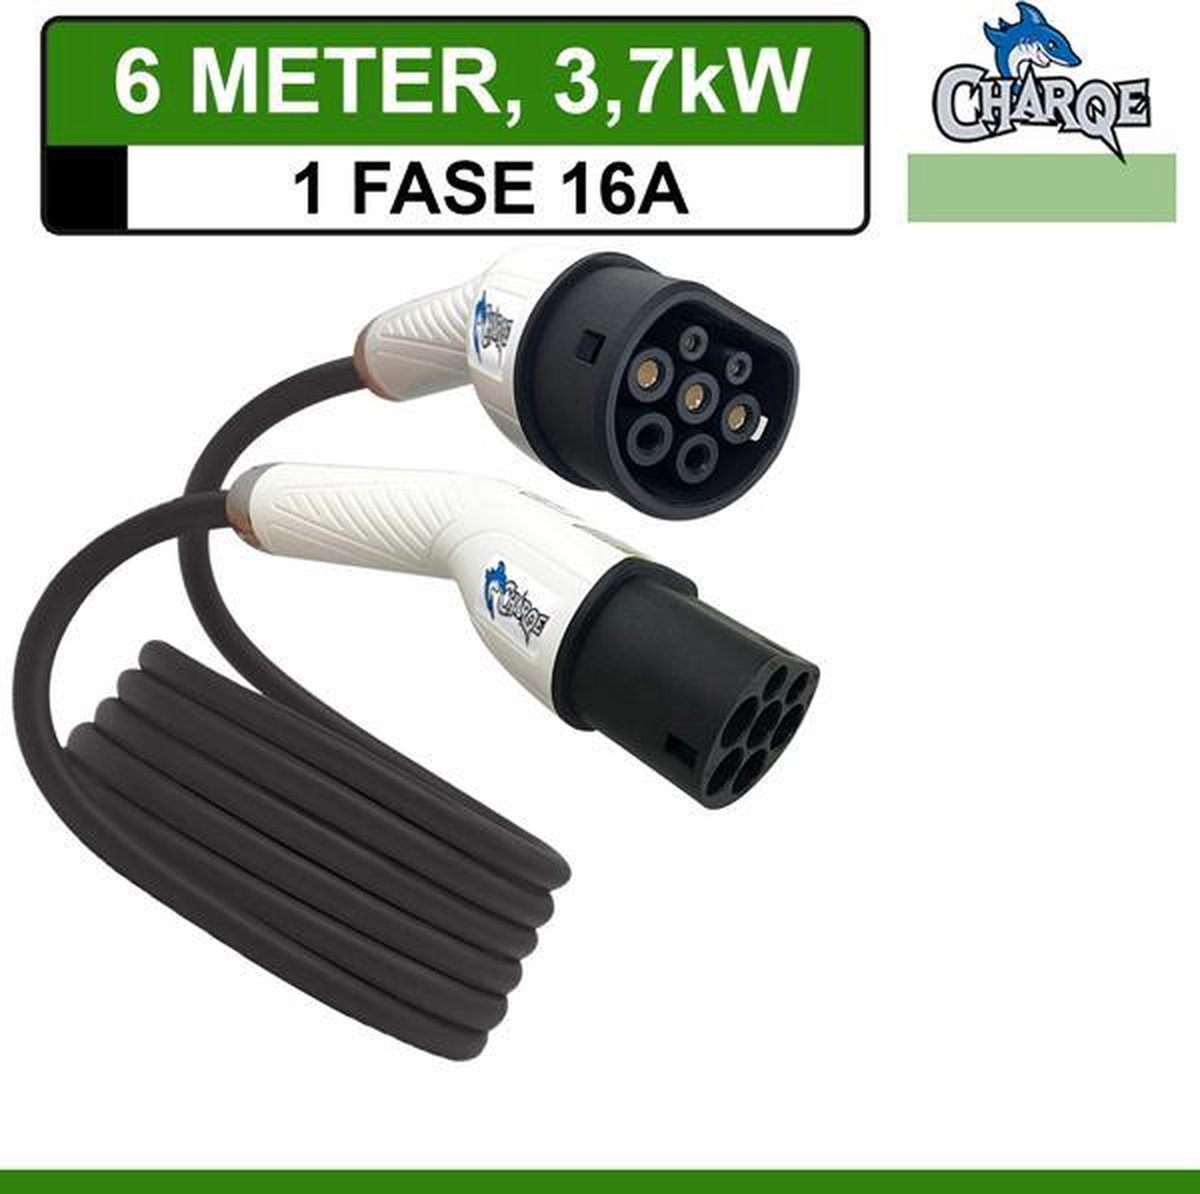 Charqe Premium Laadkabel - 6m - 3.7kW - 1 fase - 16A